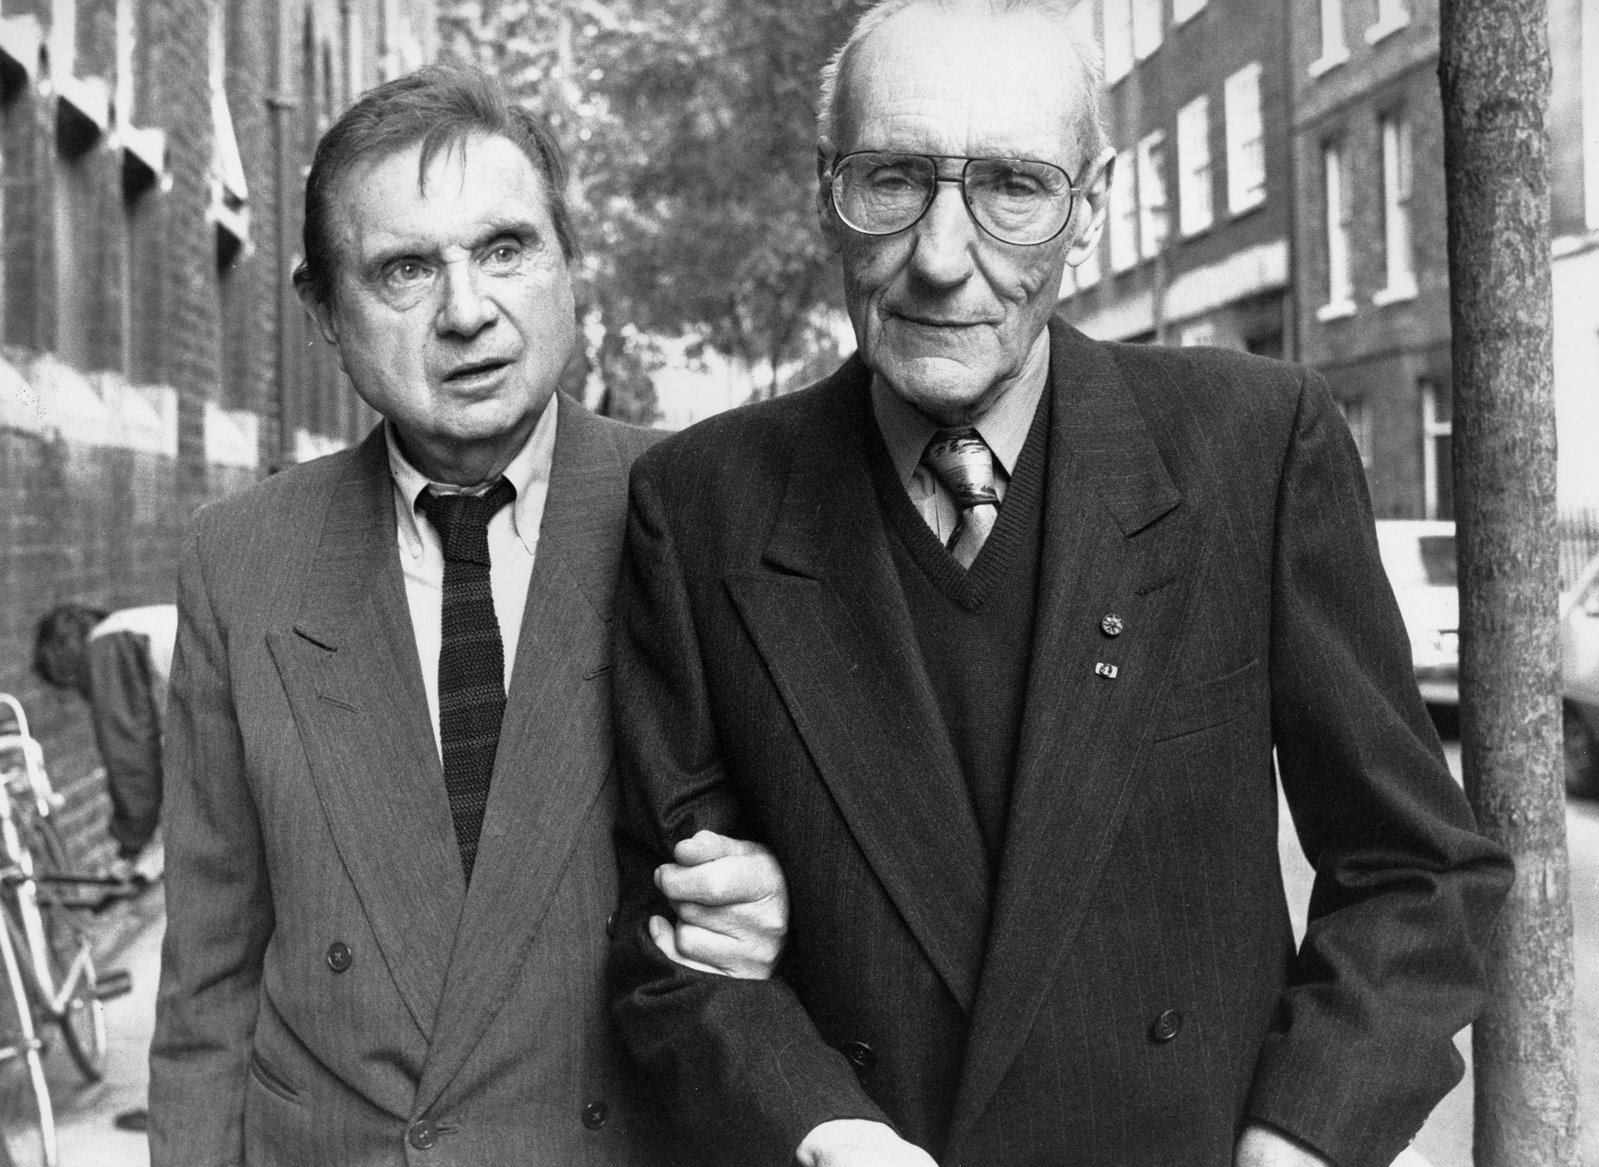 [Francis+Bacon+and+William+Burroughs,+London+1989.jpg]